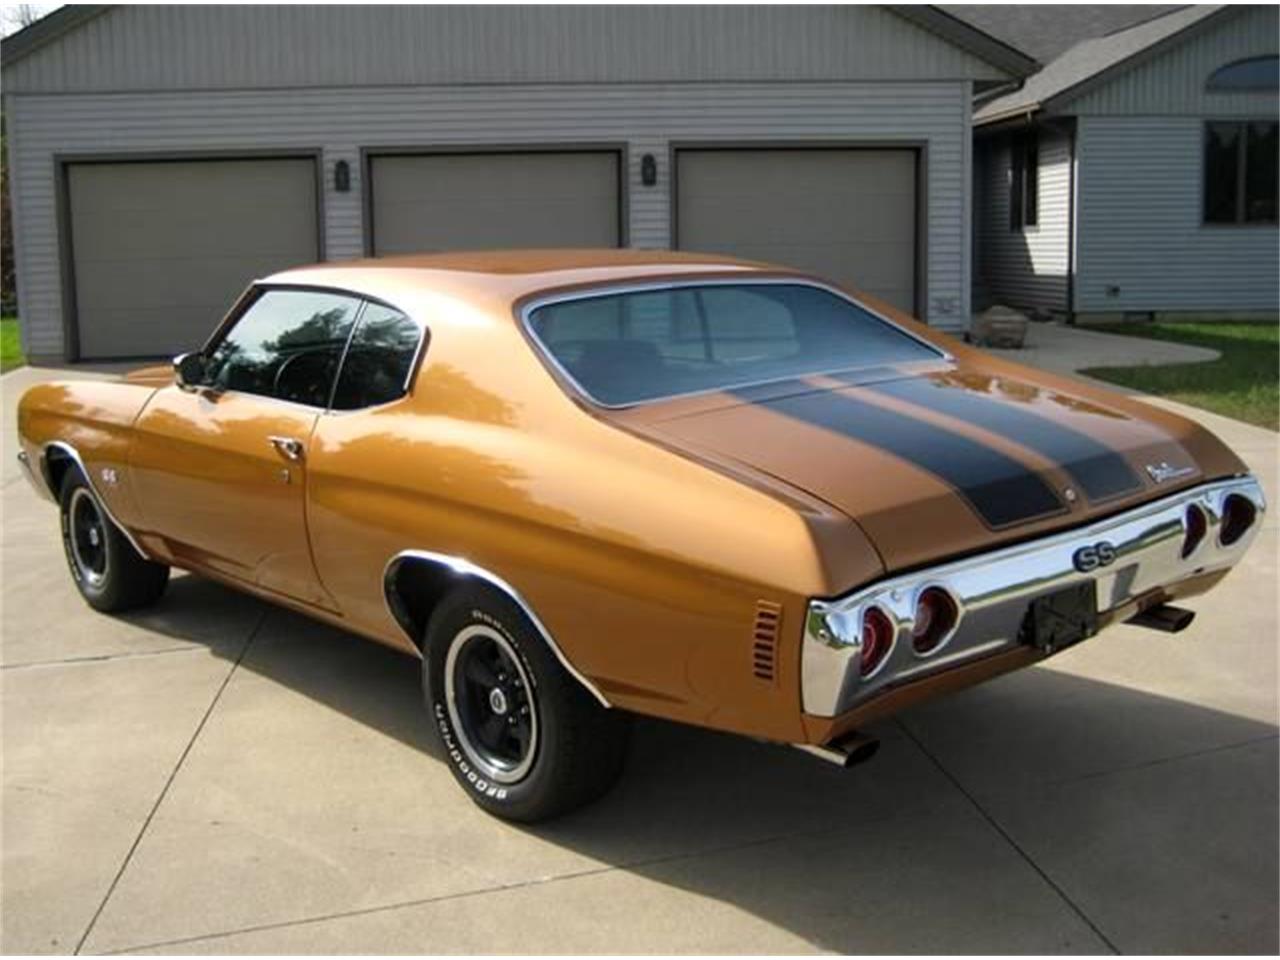 Chevrolet Chevelle Ss For Sale Classiccars Cc